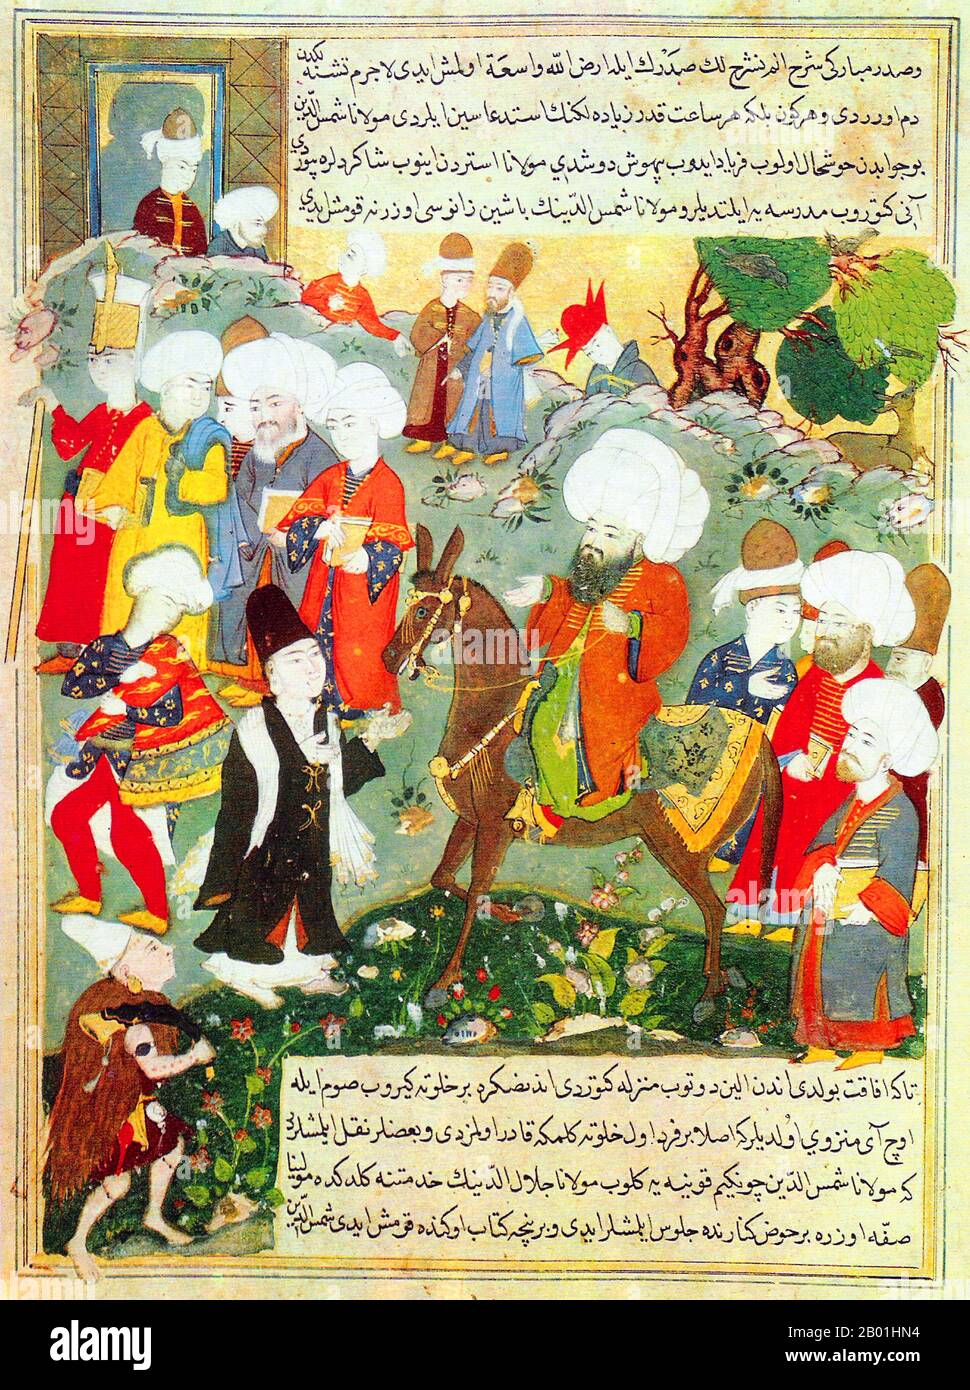 Afghanistan/Iran: The Persian poet Rumi depicted on a pony  in the Turkish 'Jâmi al-siyar' by Mohammad Tahir Suhravardî, c. 1600.  Jalāl ad-Dīn Muḥammad Balkhī (30 September 1207 - 17 December 1273), also known as Jalāl ad-Dīn Muḥammad Rūmī and popularly known as Mevlānā in Turkey and Mawlānā in Iran and Afghanistan but known to the English-speaking world simply as Rumi, was a 13th-century Persian Muslim poet, jurist, theologian and Sufi mystic.  He was born in Balkh Province in Afghanistan at a small town located by the river Wakhsh in what is now Tajikistan. Stock Photo